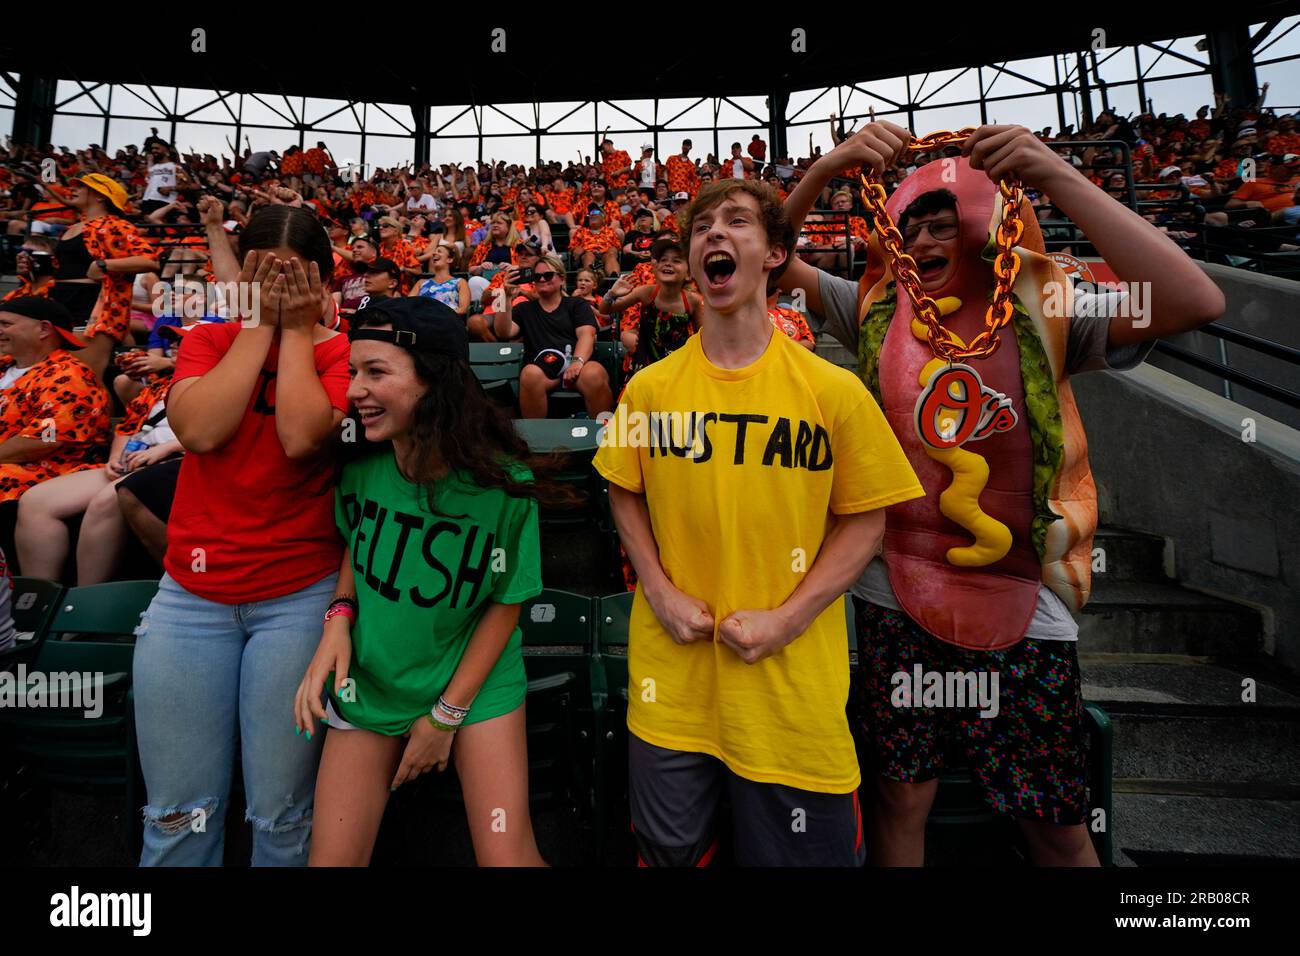 Siblings, from left, Olivia Nerad, Brooke Conger, Charles Nerad, John  Conger react after watching the Hot Dog Race on the big screen at Oriole  Park at Camden Yards during the fifth inning